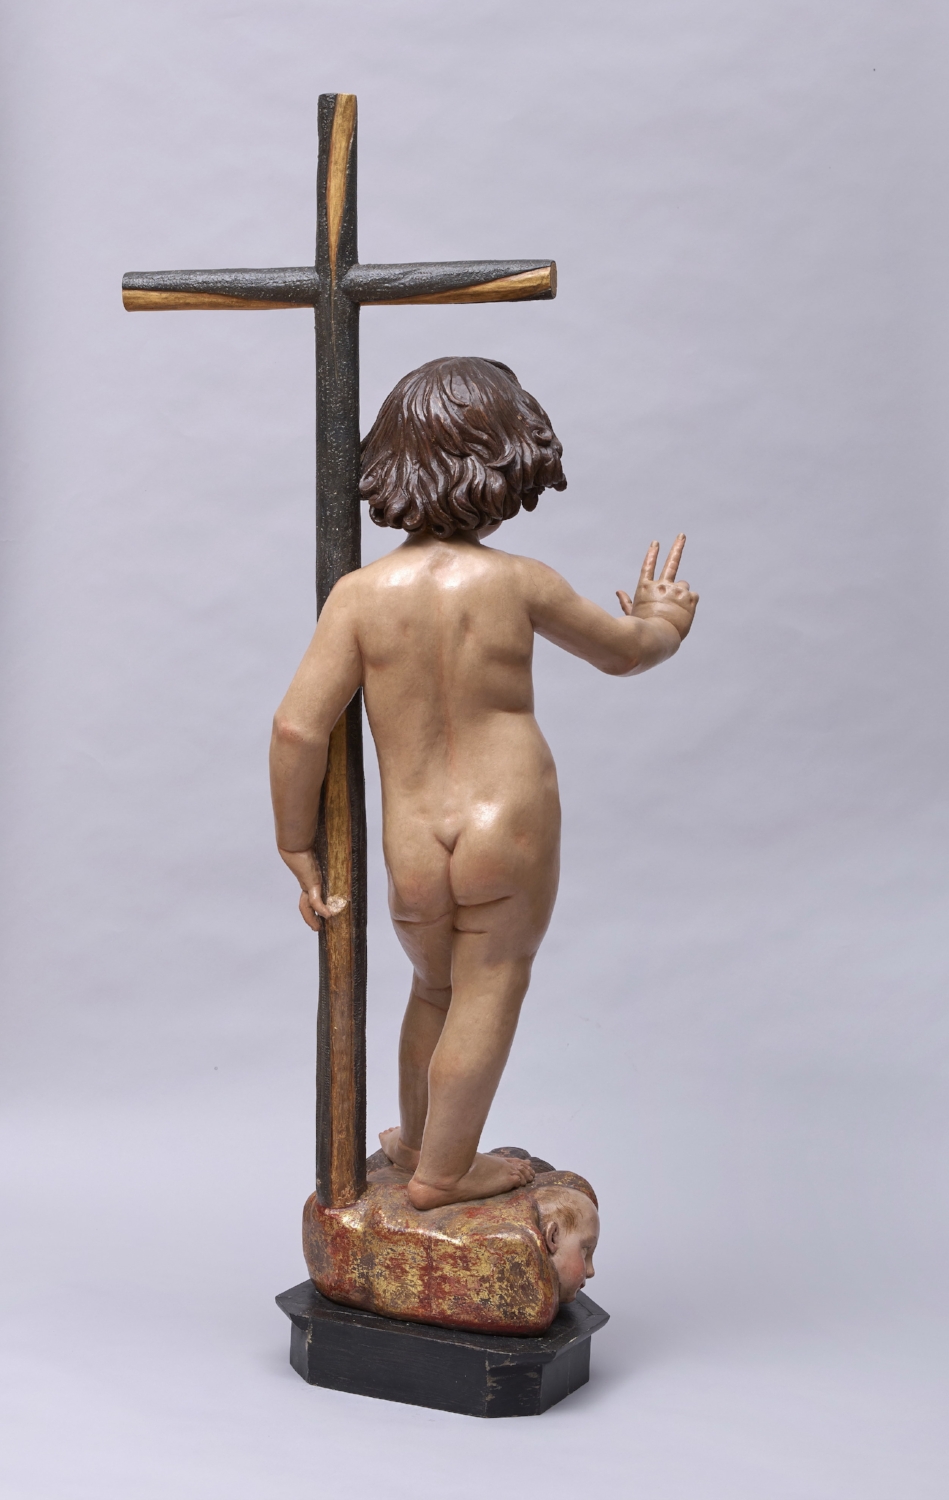 Francisco Dionisio de Ribas, Infant Jesus in triumph - View from the Reverse